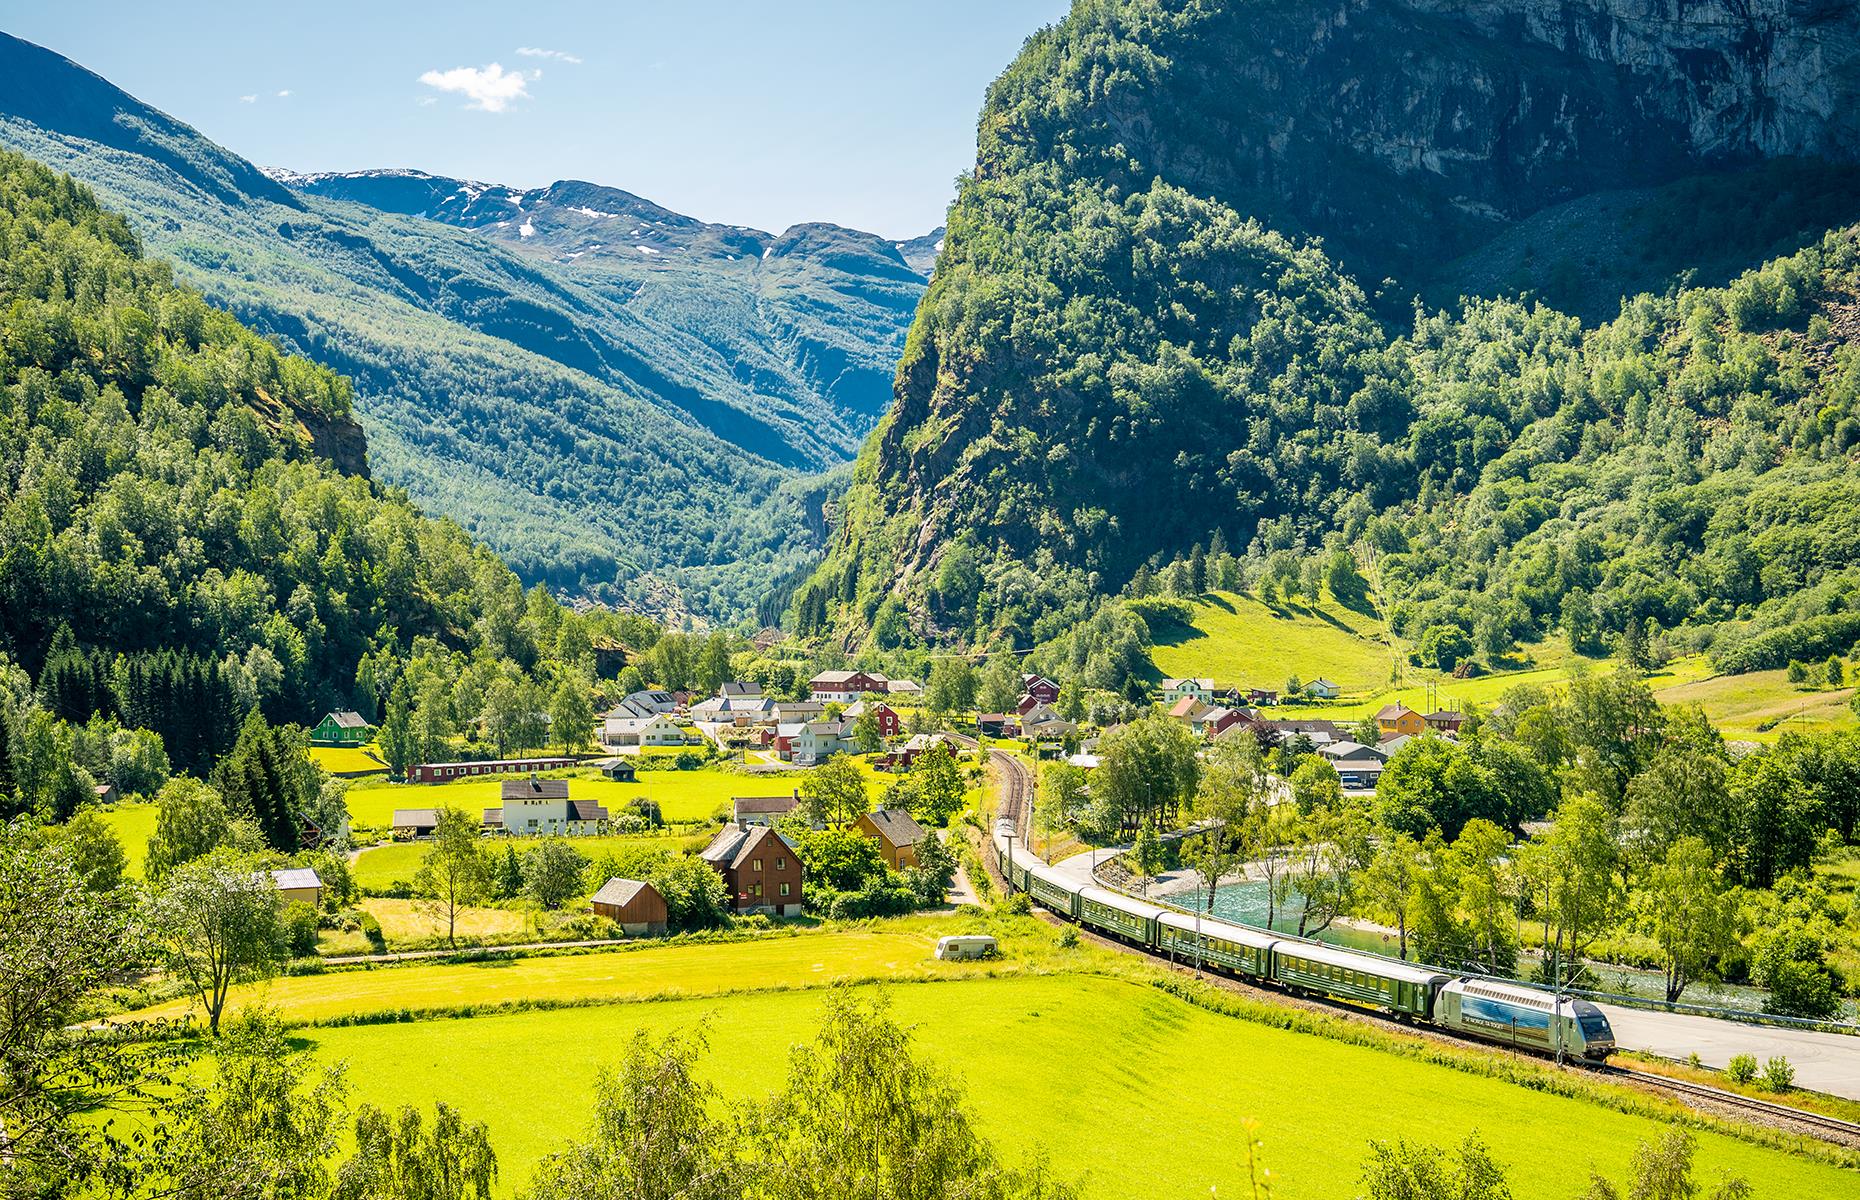 Passing deep ravines, cascading waterfalls and towering peaks, the journey is equally stunning in both summer and winter, when a blanket of snow turns the green landscape into a winter wonderland. The Flåm Railway connects with trains running between Oslo and Bergen, and round-trip fares start from £38 ($46).